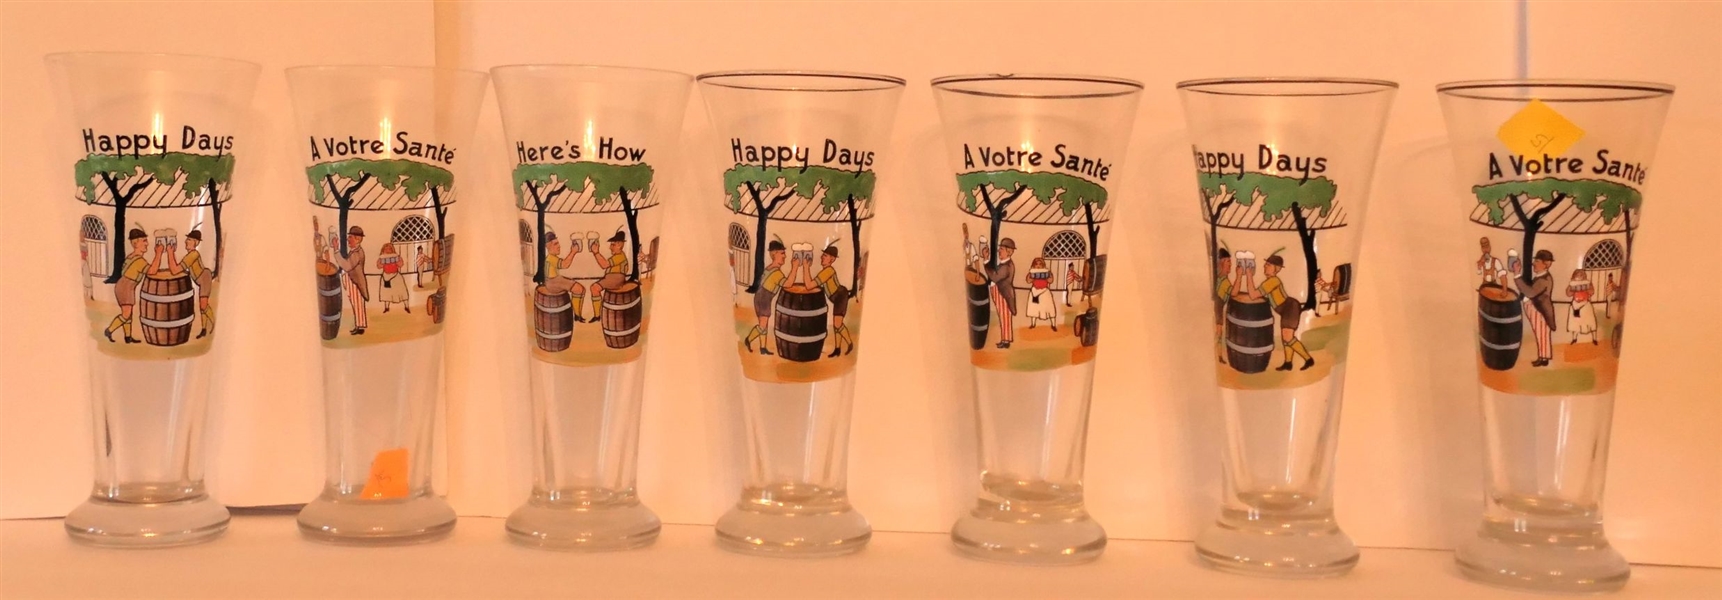 7 Beer Glasses with "Heres How, Happy Days, and A Votre Sante" - Each Measures 7 1/2"